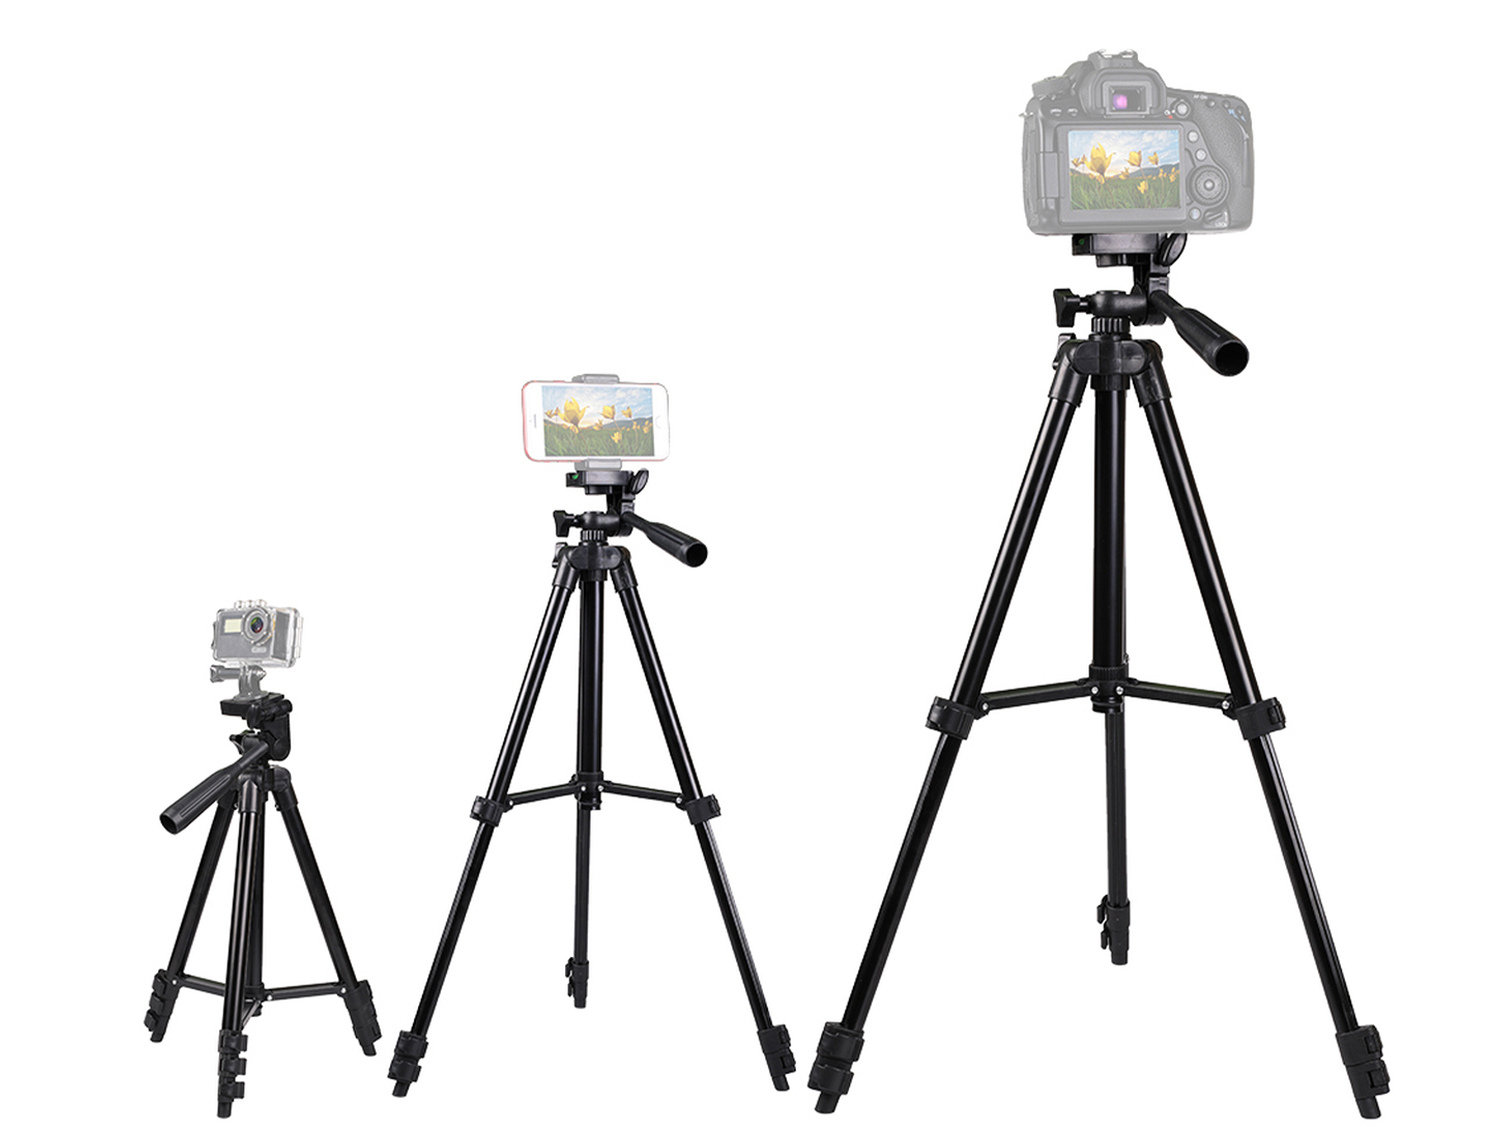 Tripod 3120A Stand Holder for Mobile & Camera